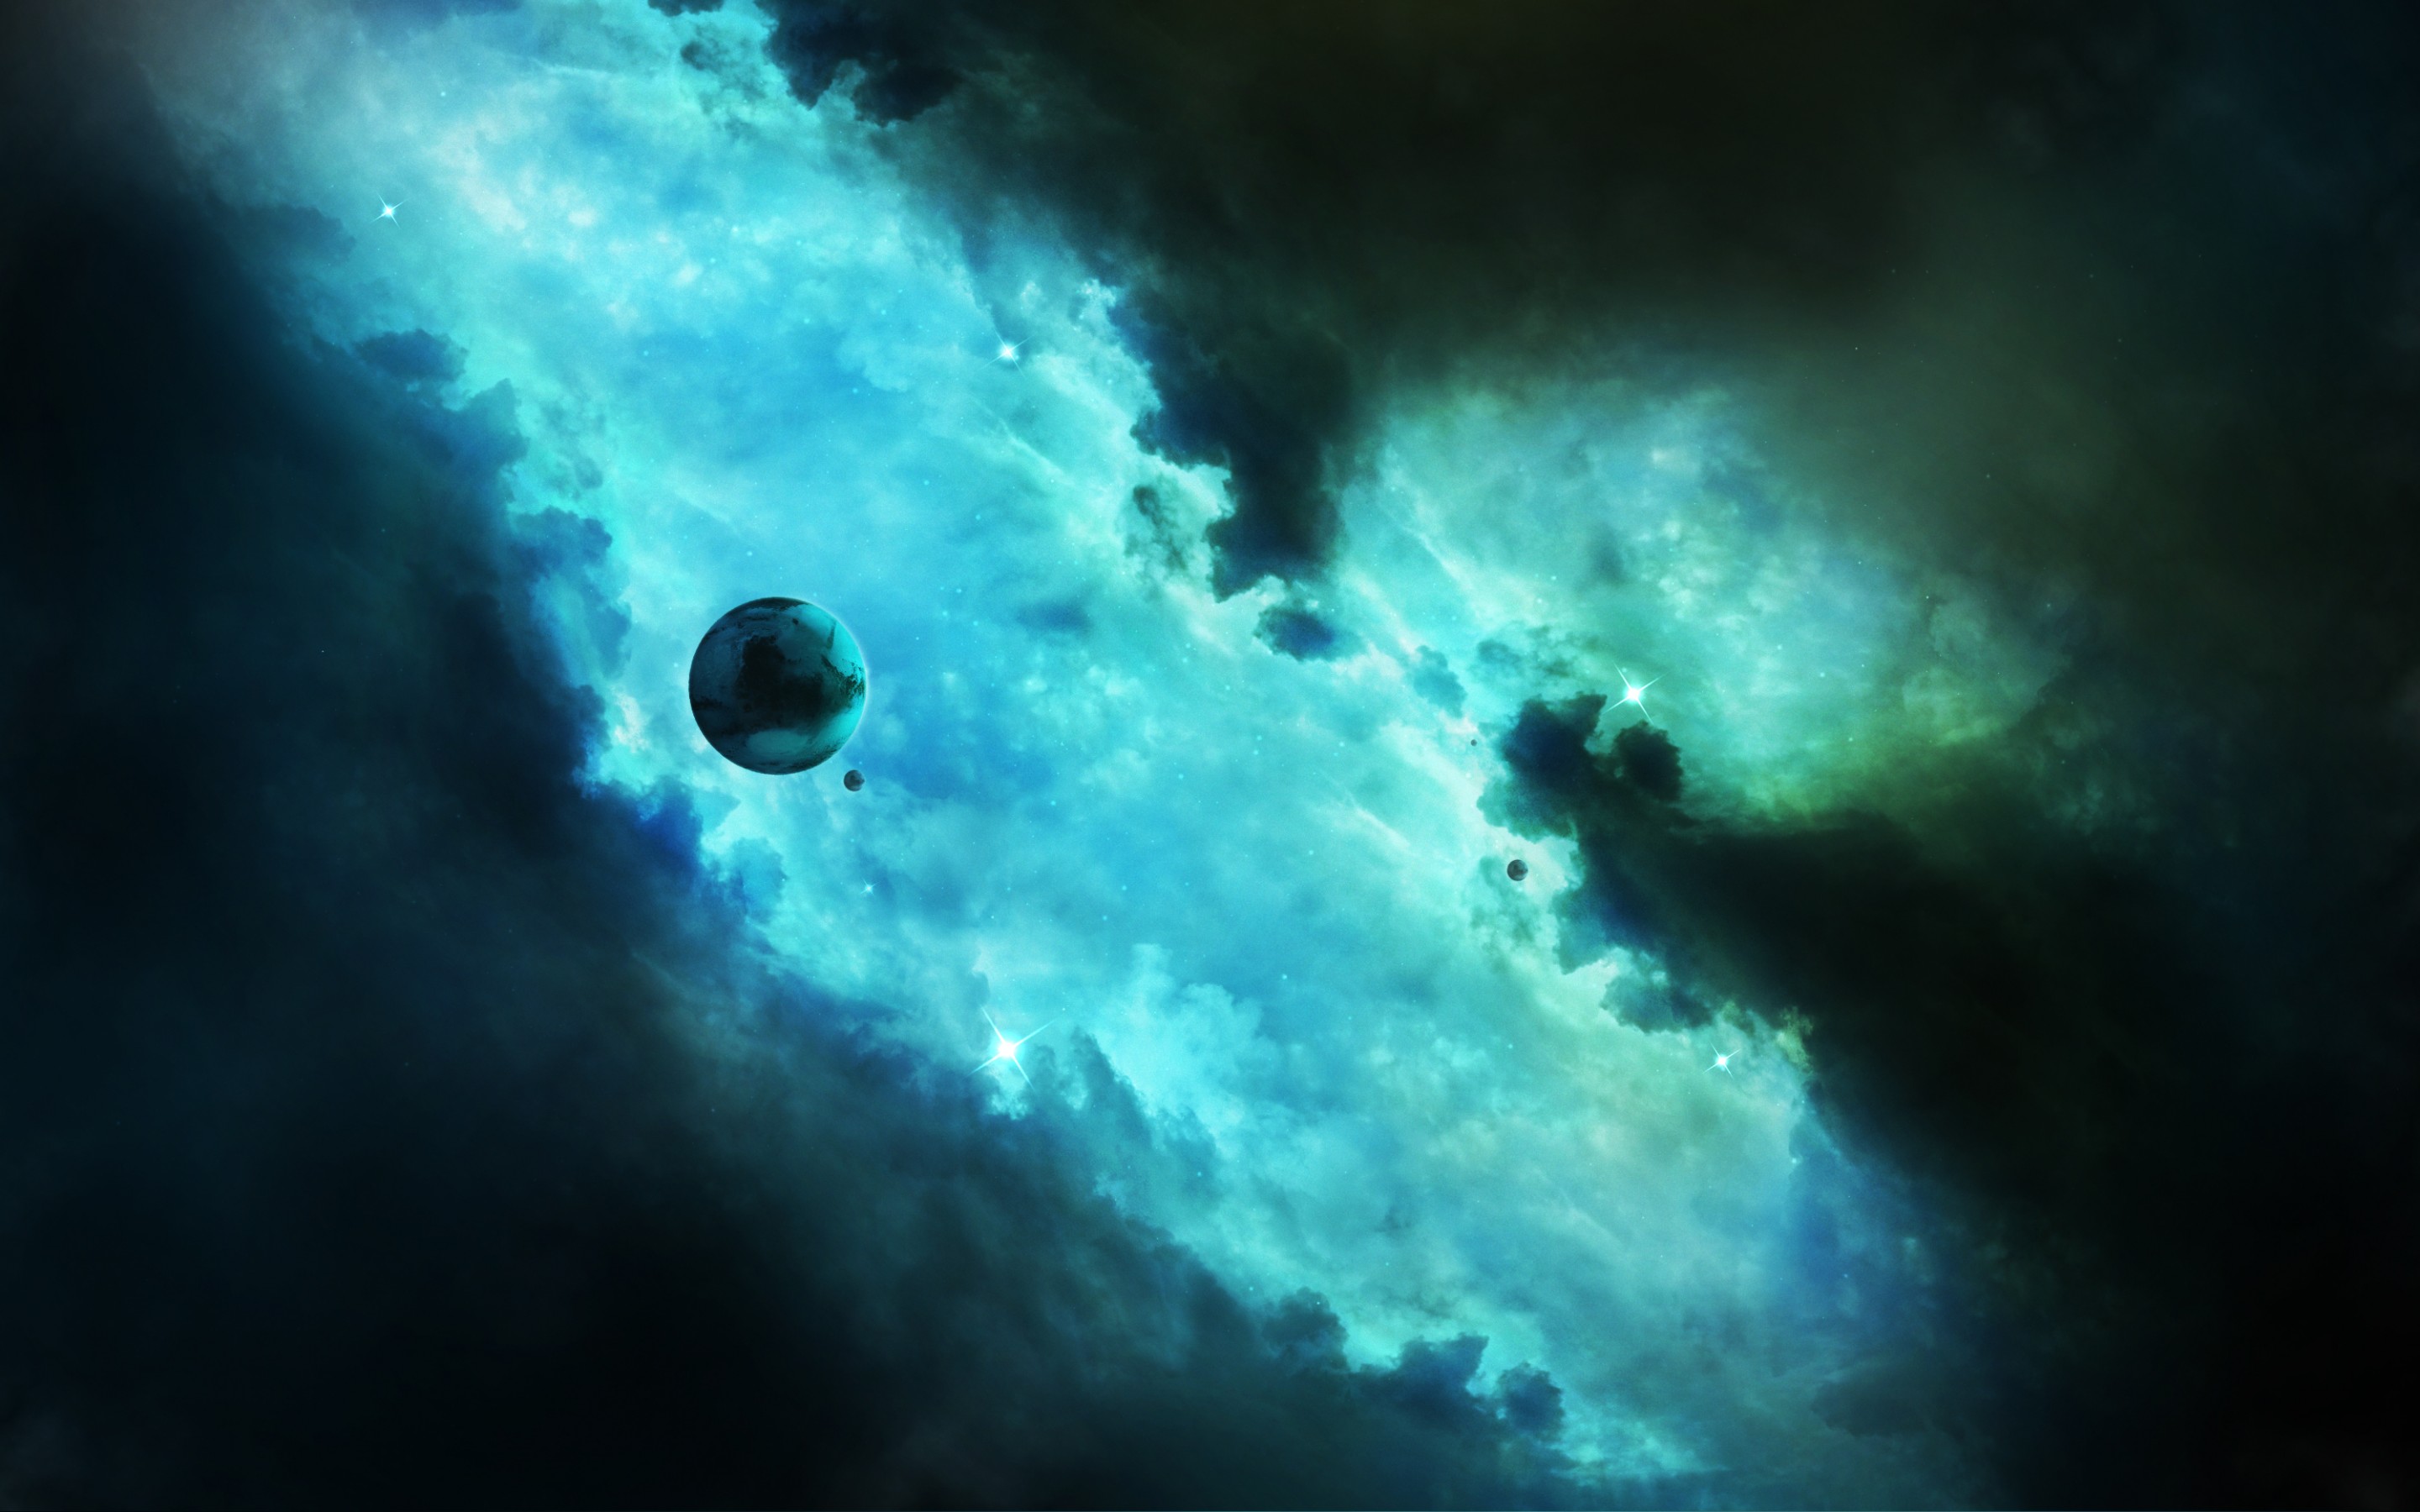 Turquoise Space Digital Art Wallpapers